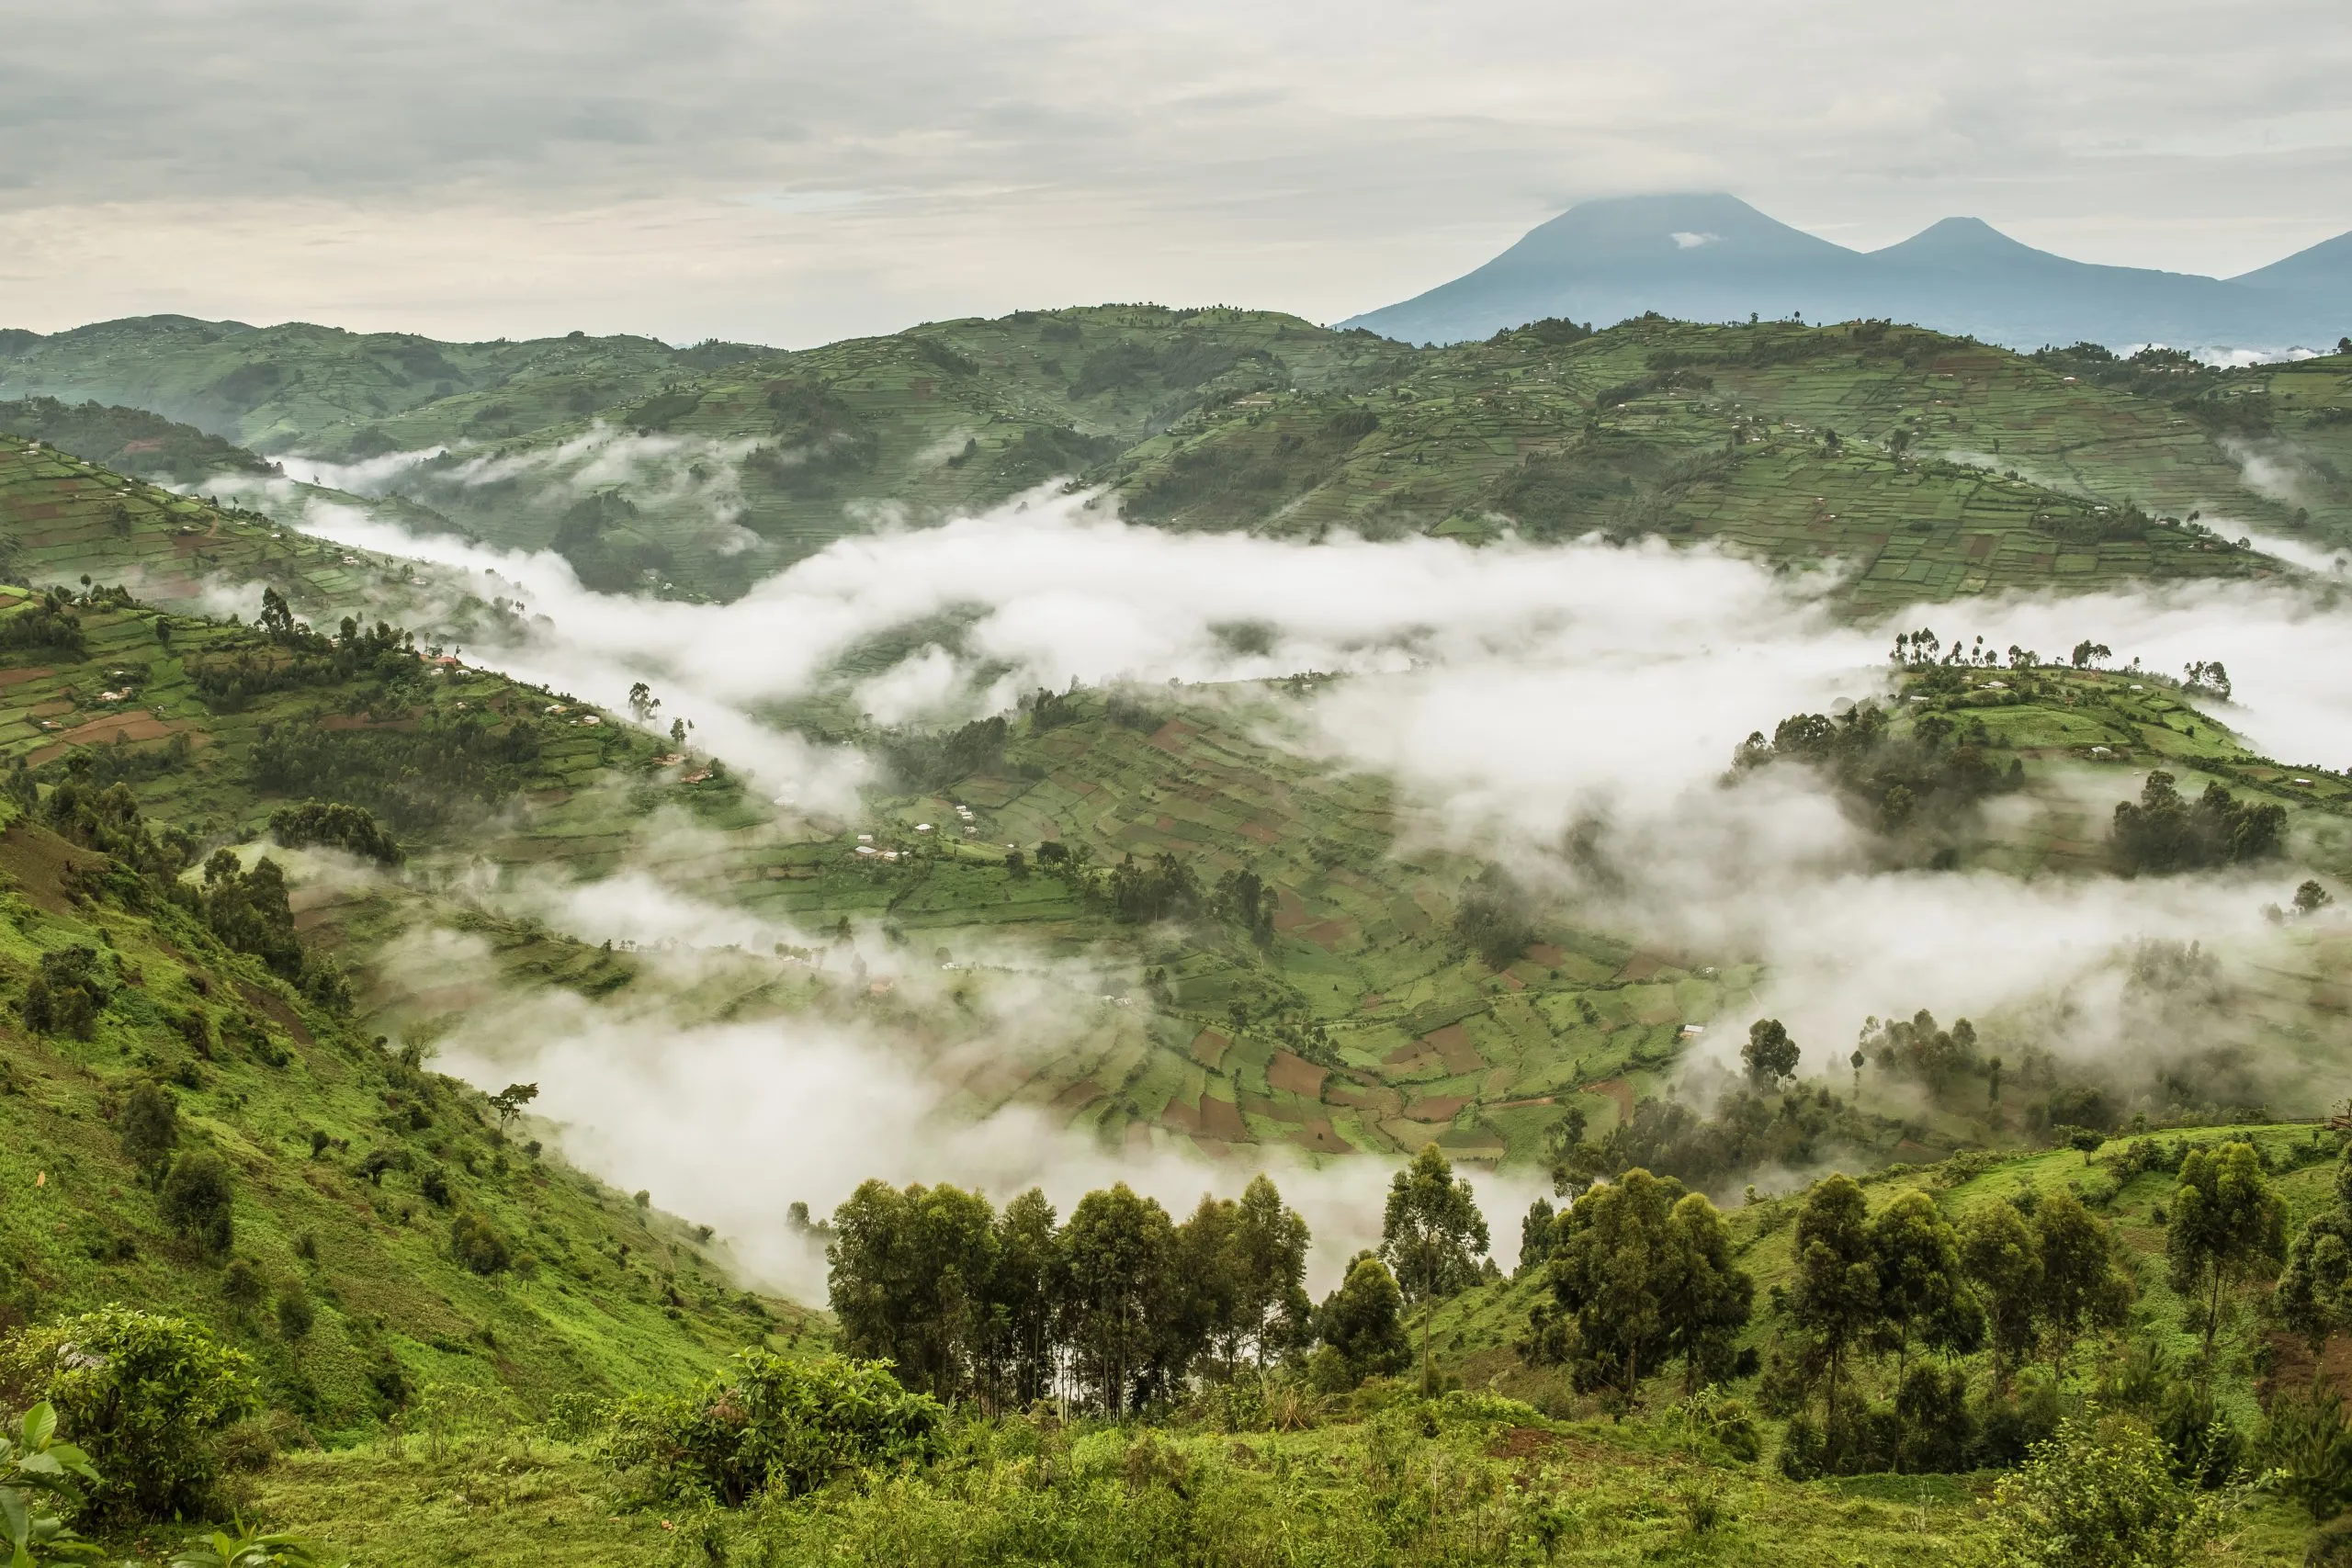 Typical hilly landscape full of fields partially covered in fog near the Bwindi Impenetrable National Park in Uganda